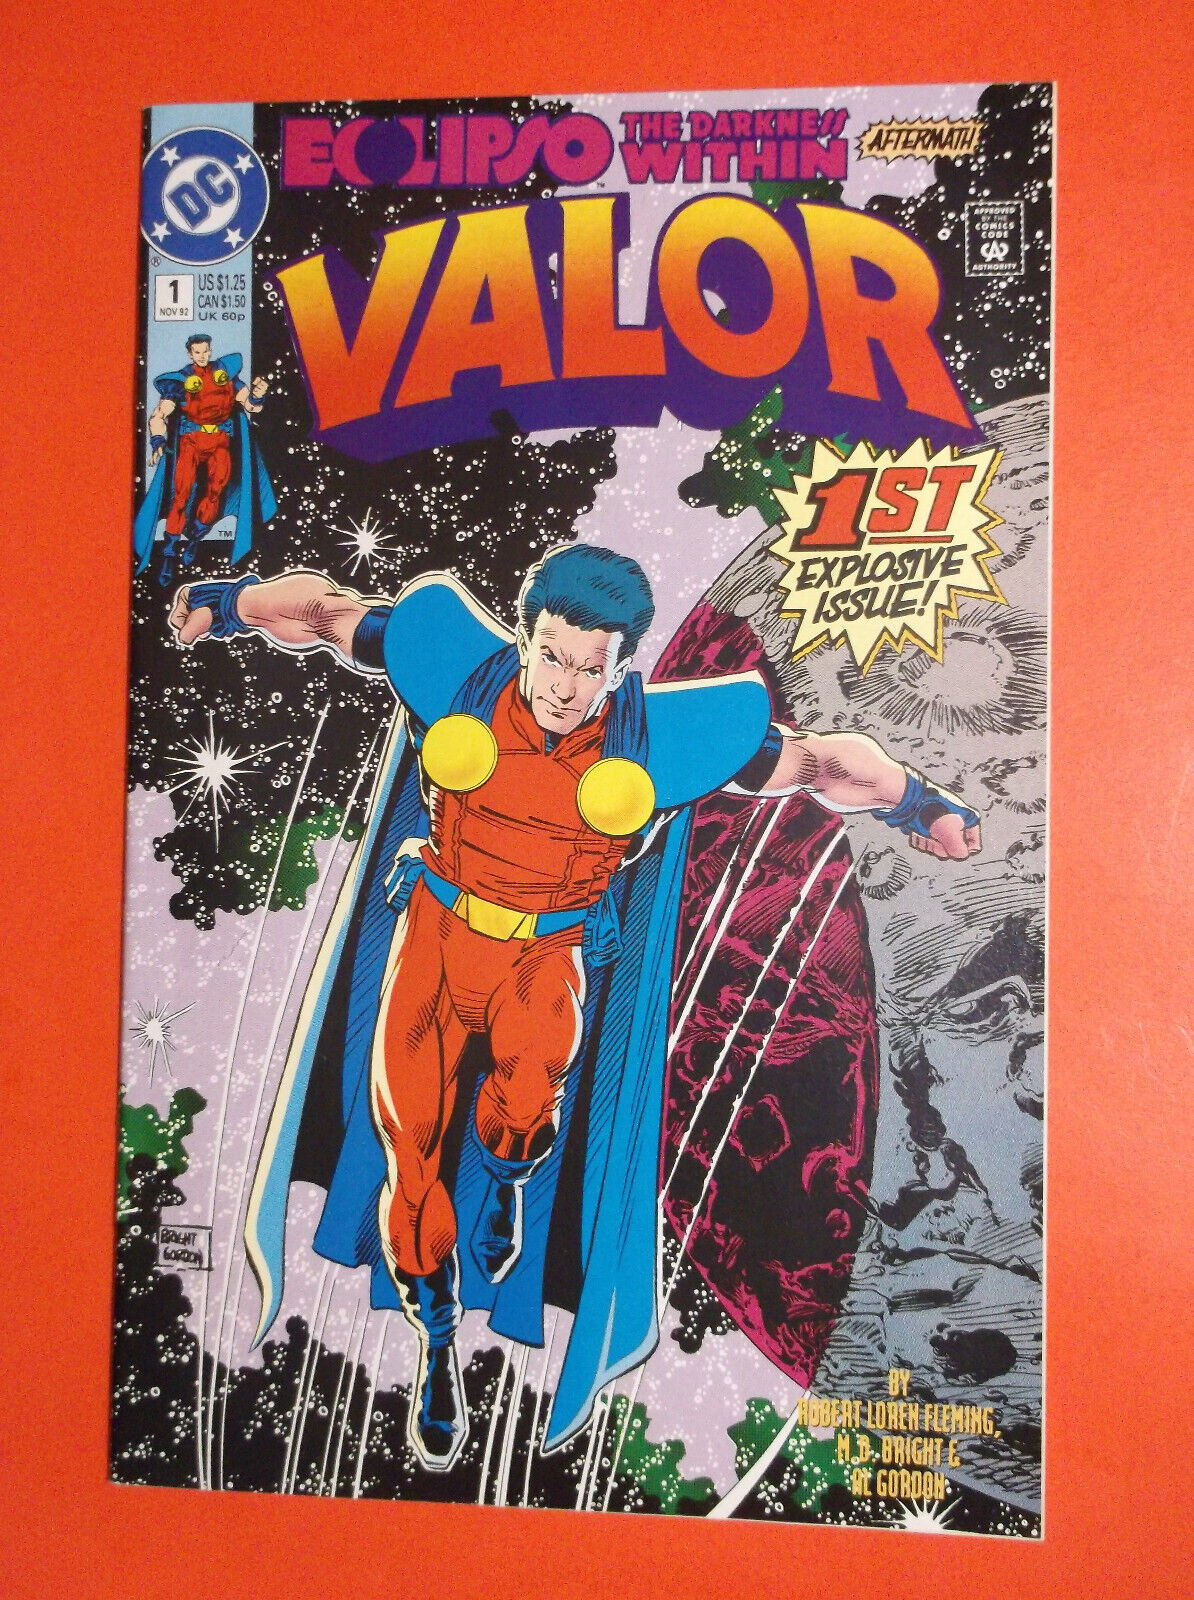 VALOR # 1 - NM 9.2/9.4 - 1992 BRIGHT COVER - 1st EXPLOSIVE ISSUE